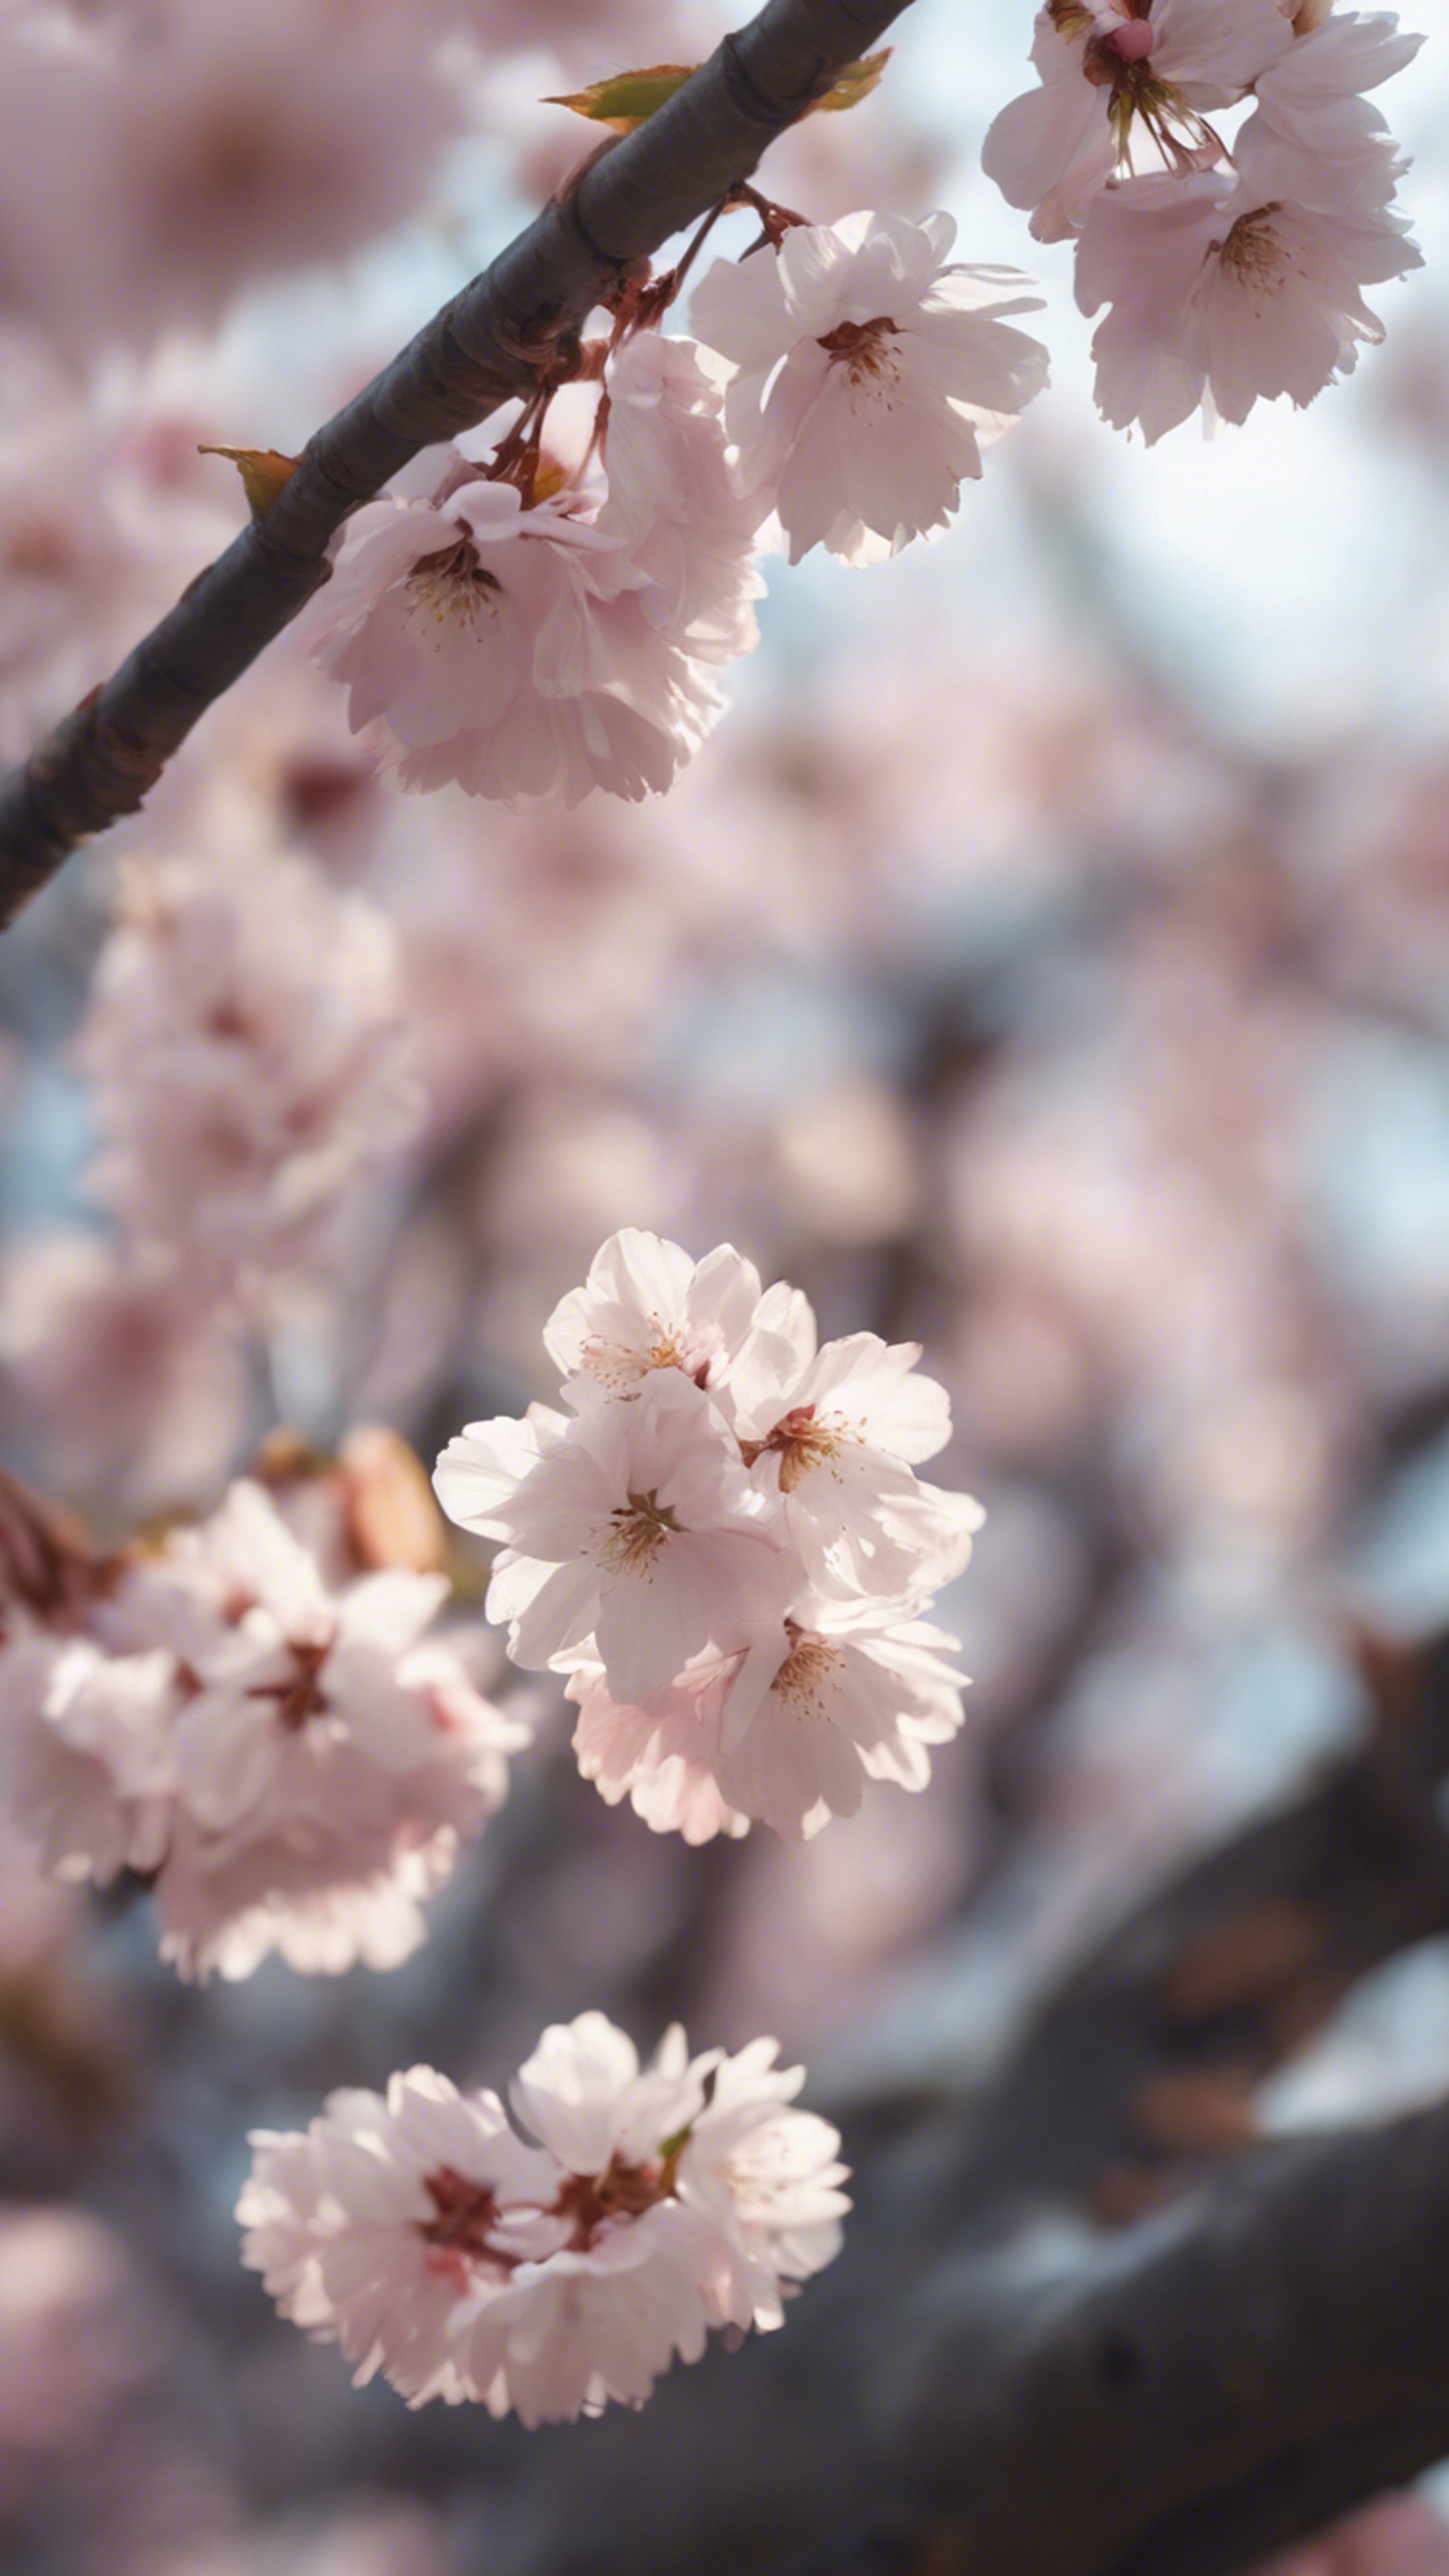 A close-up view of cherry blossom petals falling gently from the tree. 墙纸[73cf20157d554b6991b4]